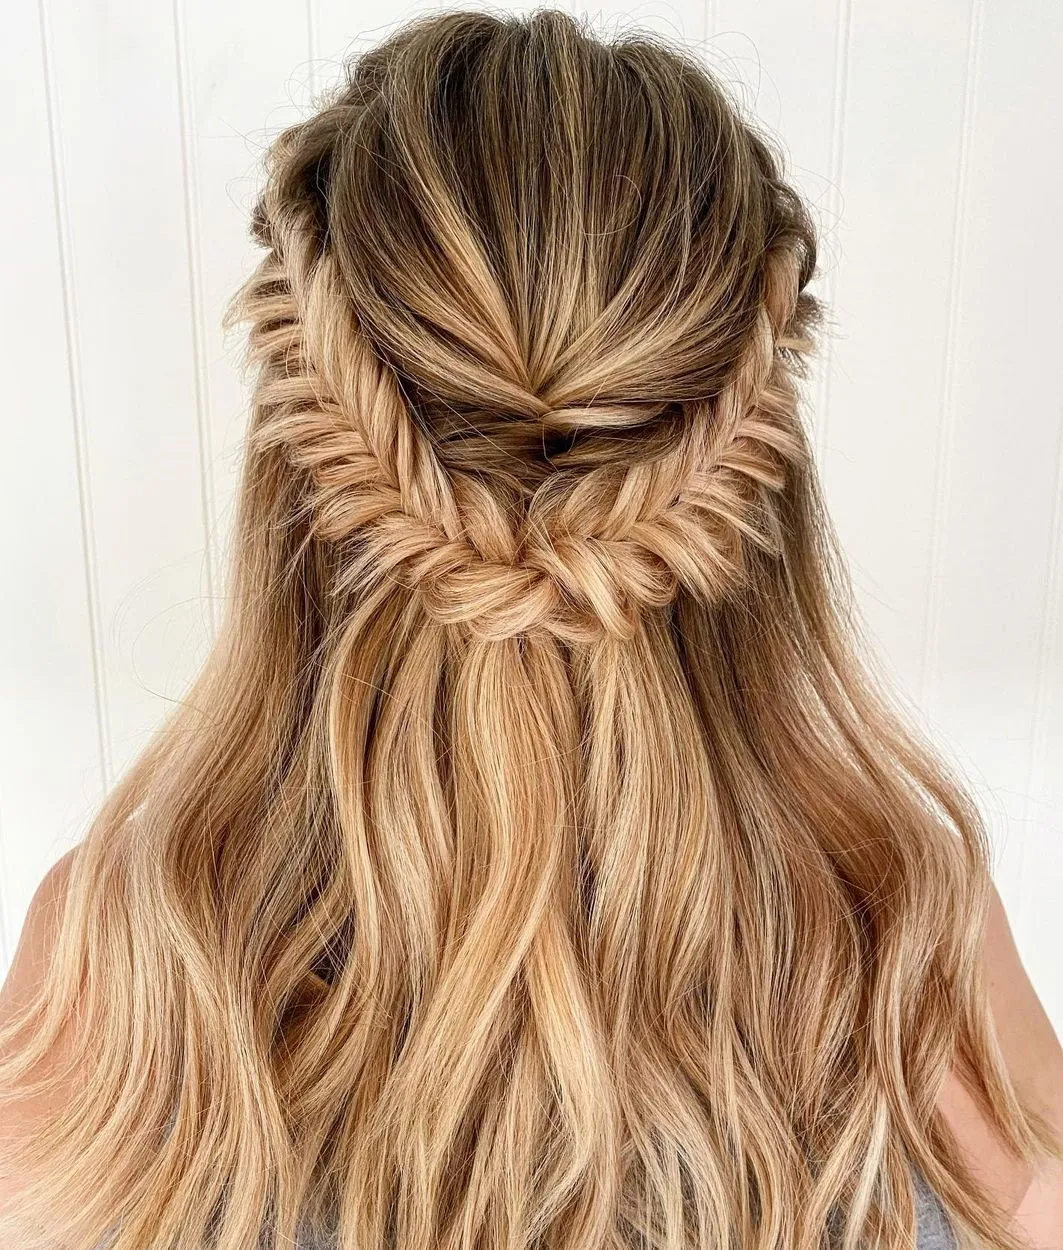 The Relaxed Fishtail Braid to look cute